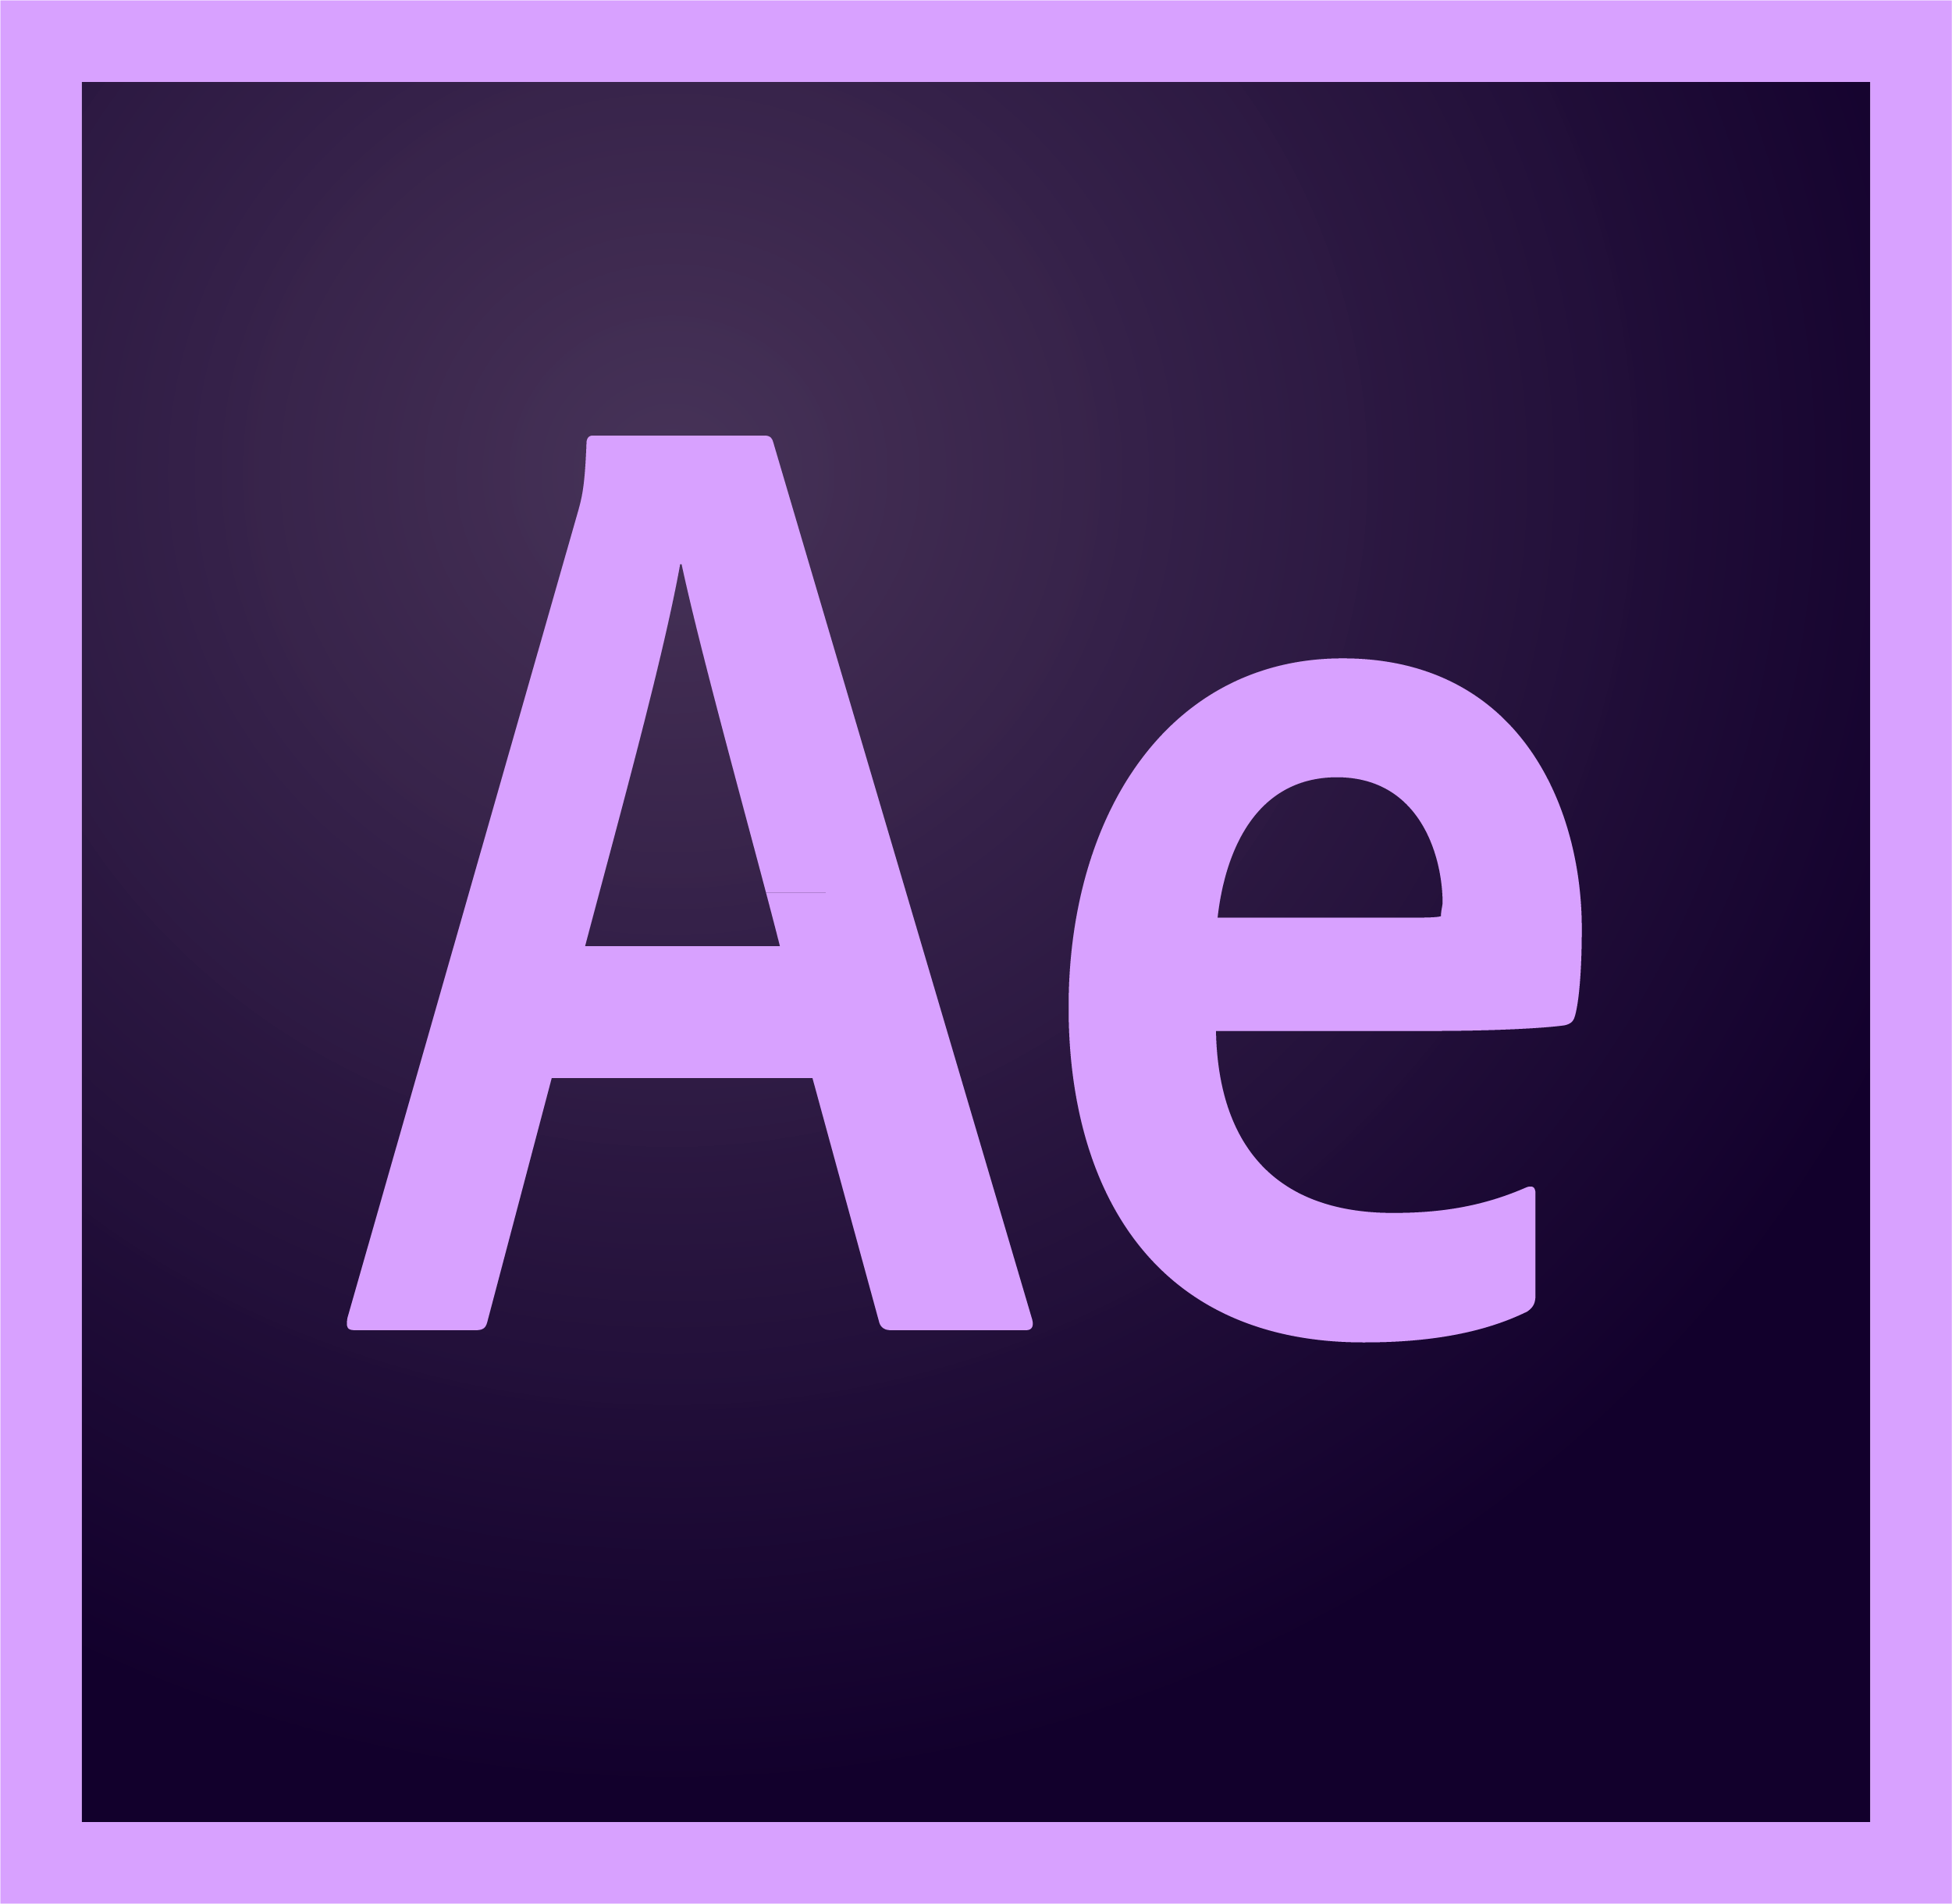 crack adobe after effects cc 2018